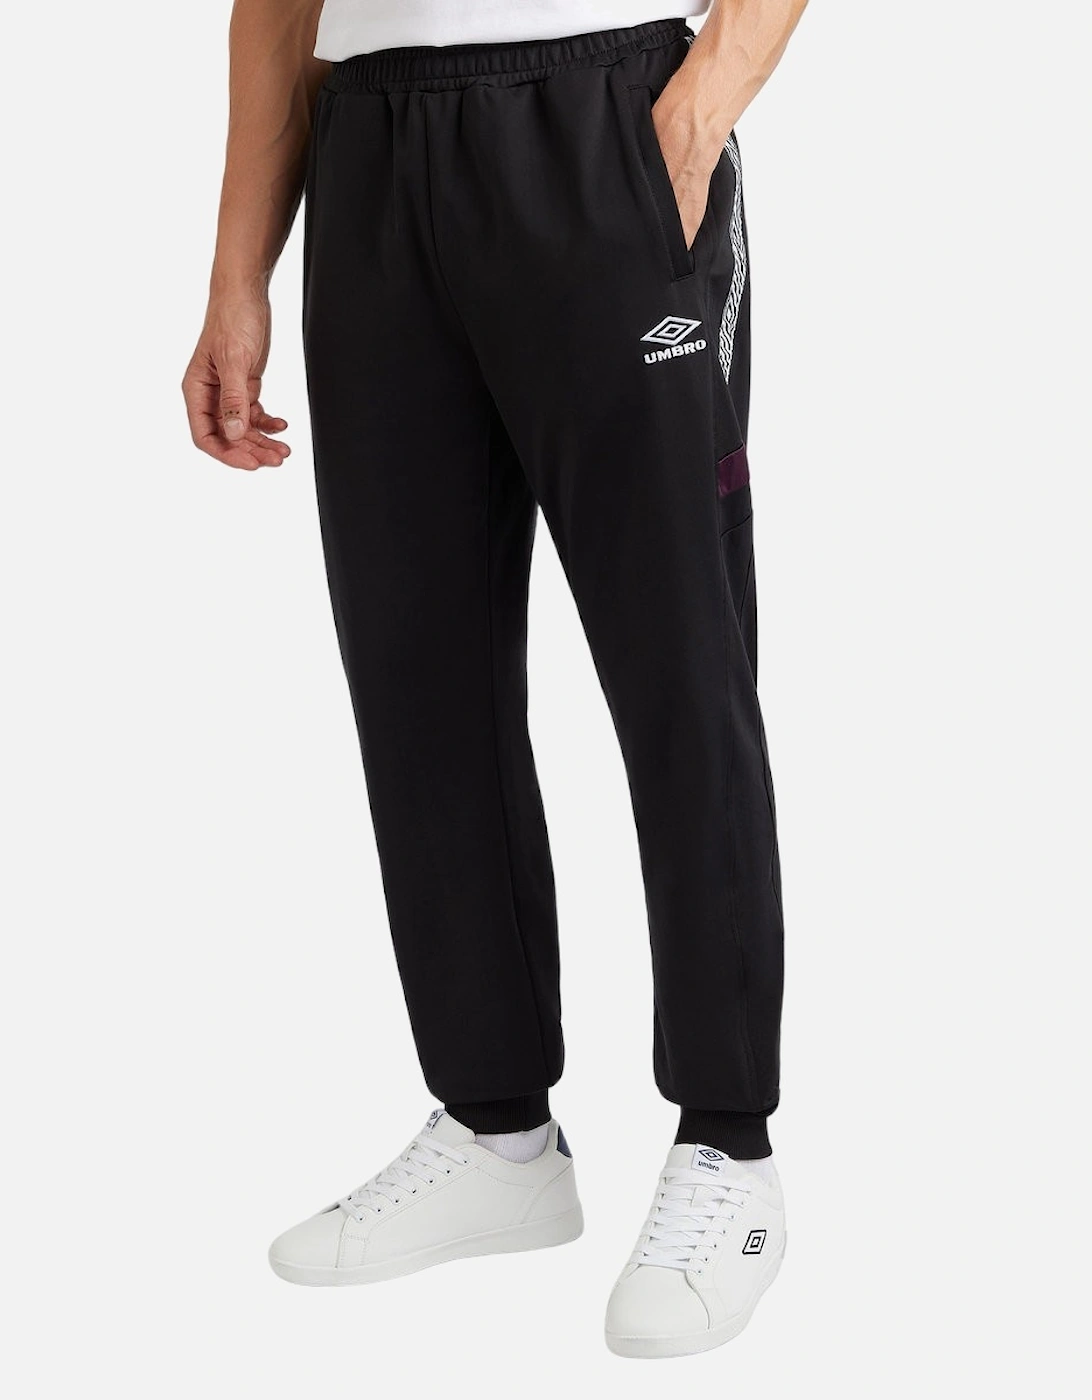 Mens Sports Style Club Tricot Jogging Bottoms